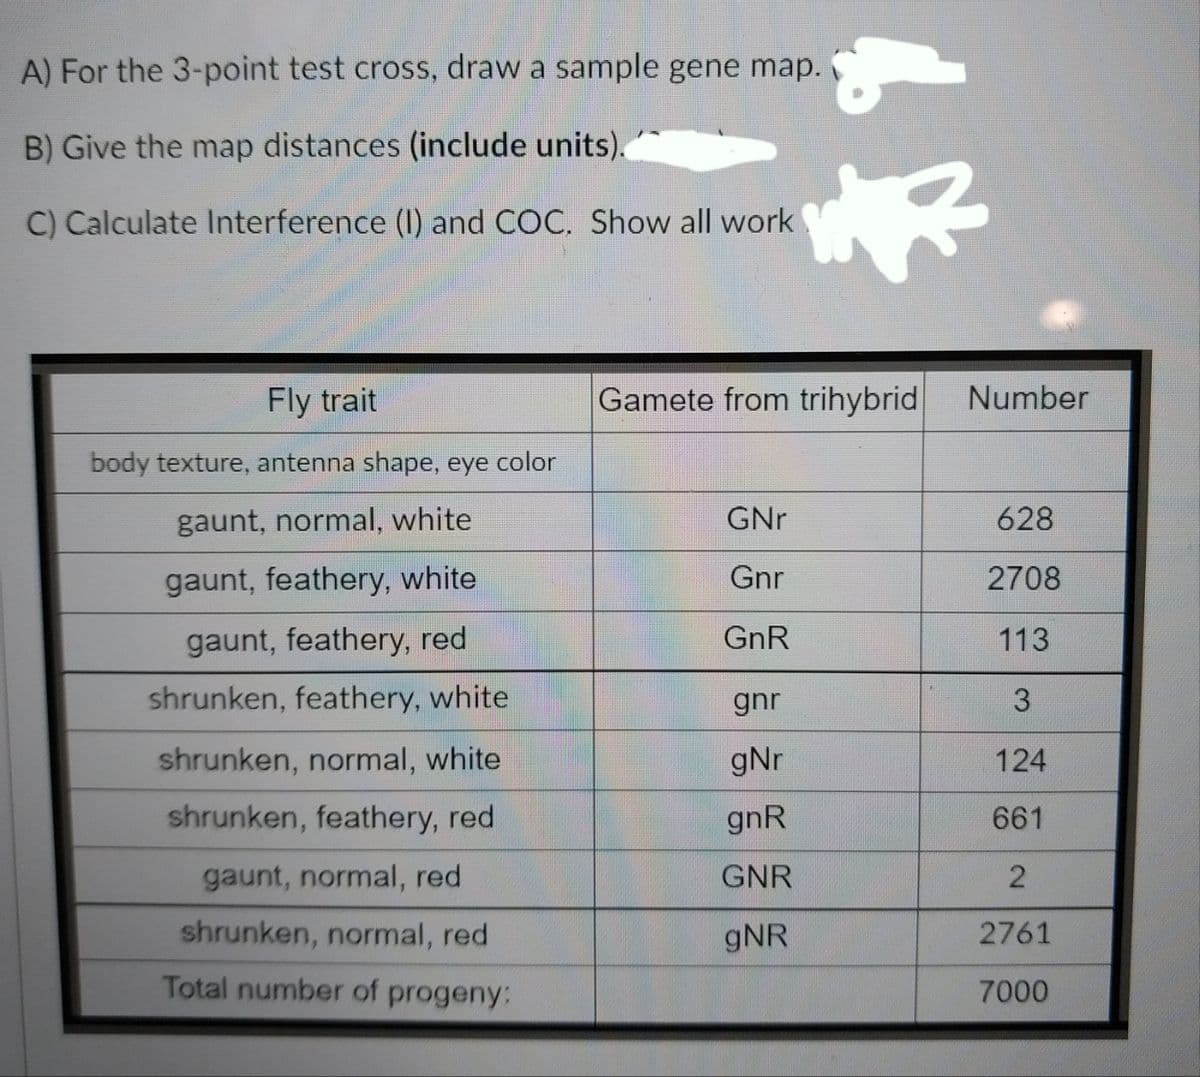 A) For the 3-point test cross, draw a sample gene map.
B) Give the map distances (include units).
C) Calculate Interference (I) and COC. Show all work
Fly trait
body texture, antenna shape, eye color
gaunt, normal, white
gaunt, feathery, white
gaunt, feathery, red
shrunken, feathery, white
shrunken, normal, white
shrunken, feathery, red
gaunt, normal, red
shrunken, normal, red
Total number of progeny:
Gamete from trihybrid
GNr
Gnr
GnR
gnr
gNr
gnR
GNR
gNR
Number
628
2708
113
3
124
661
2
2761
7000